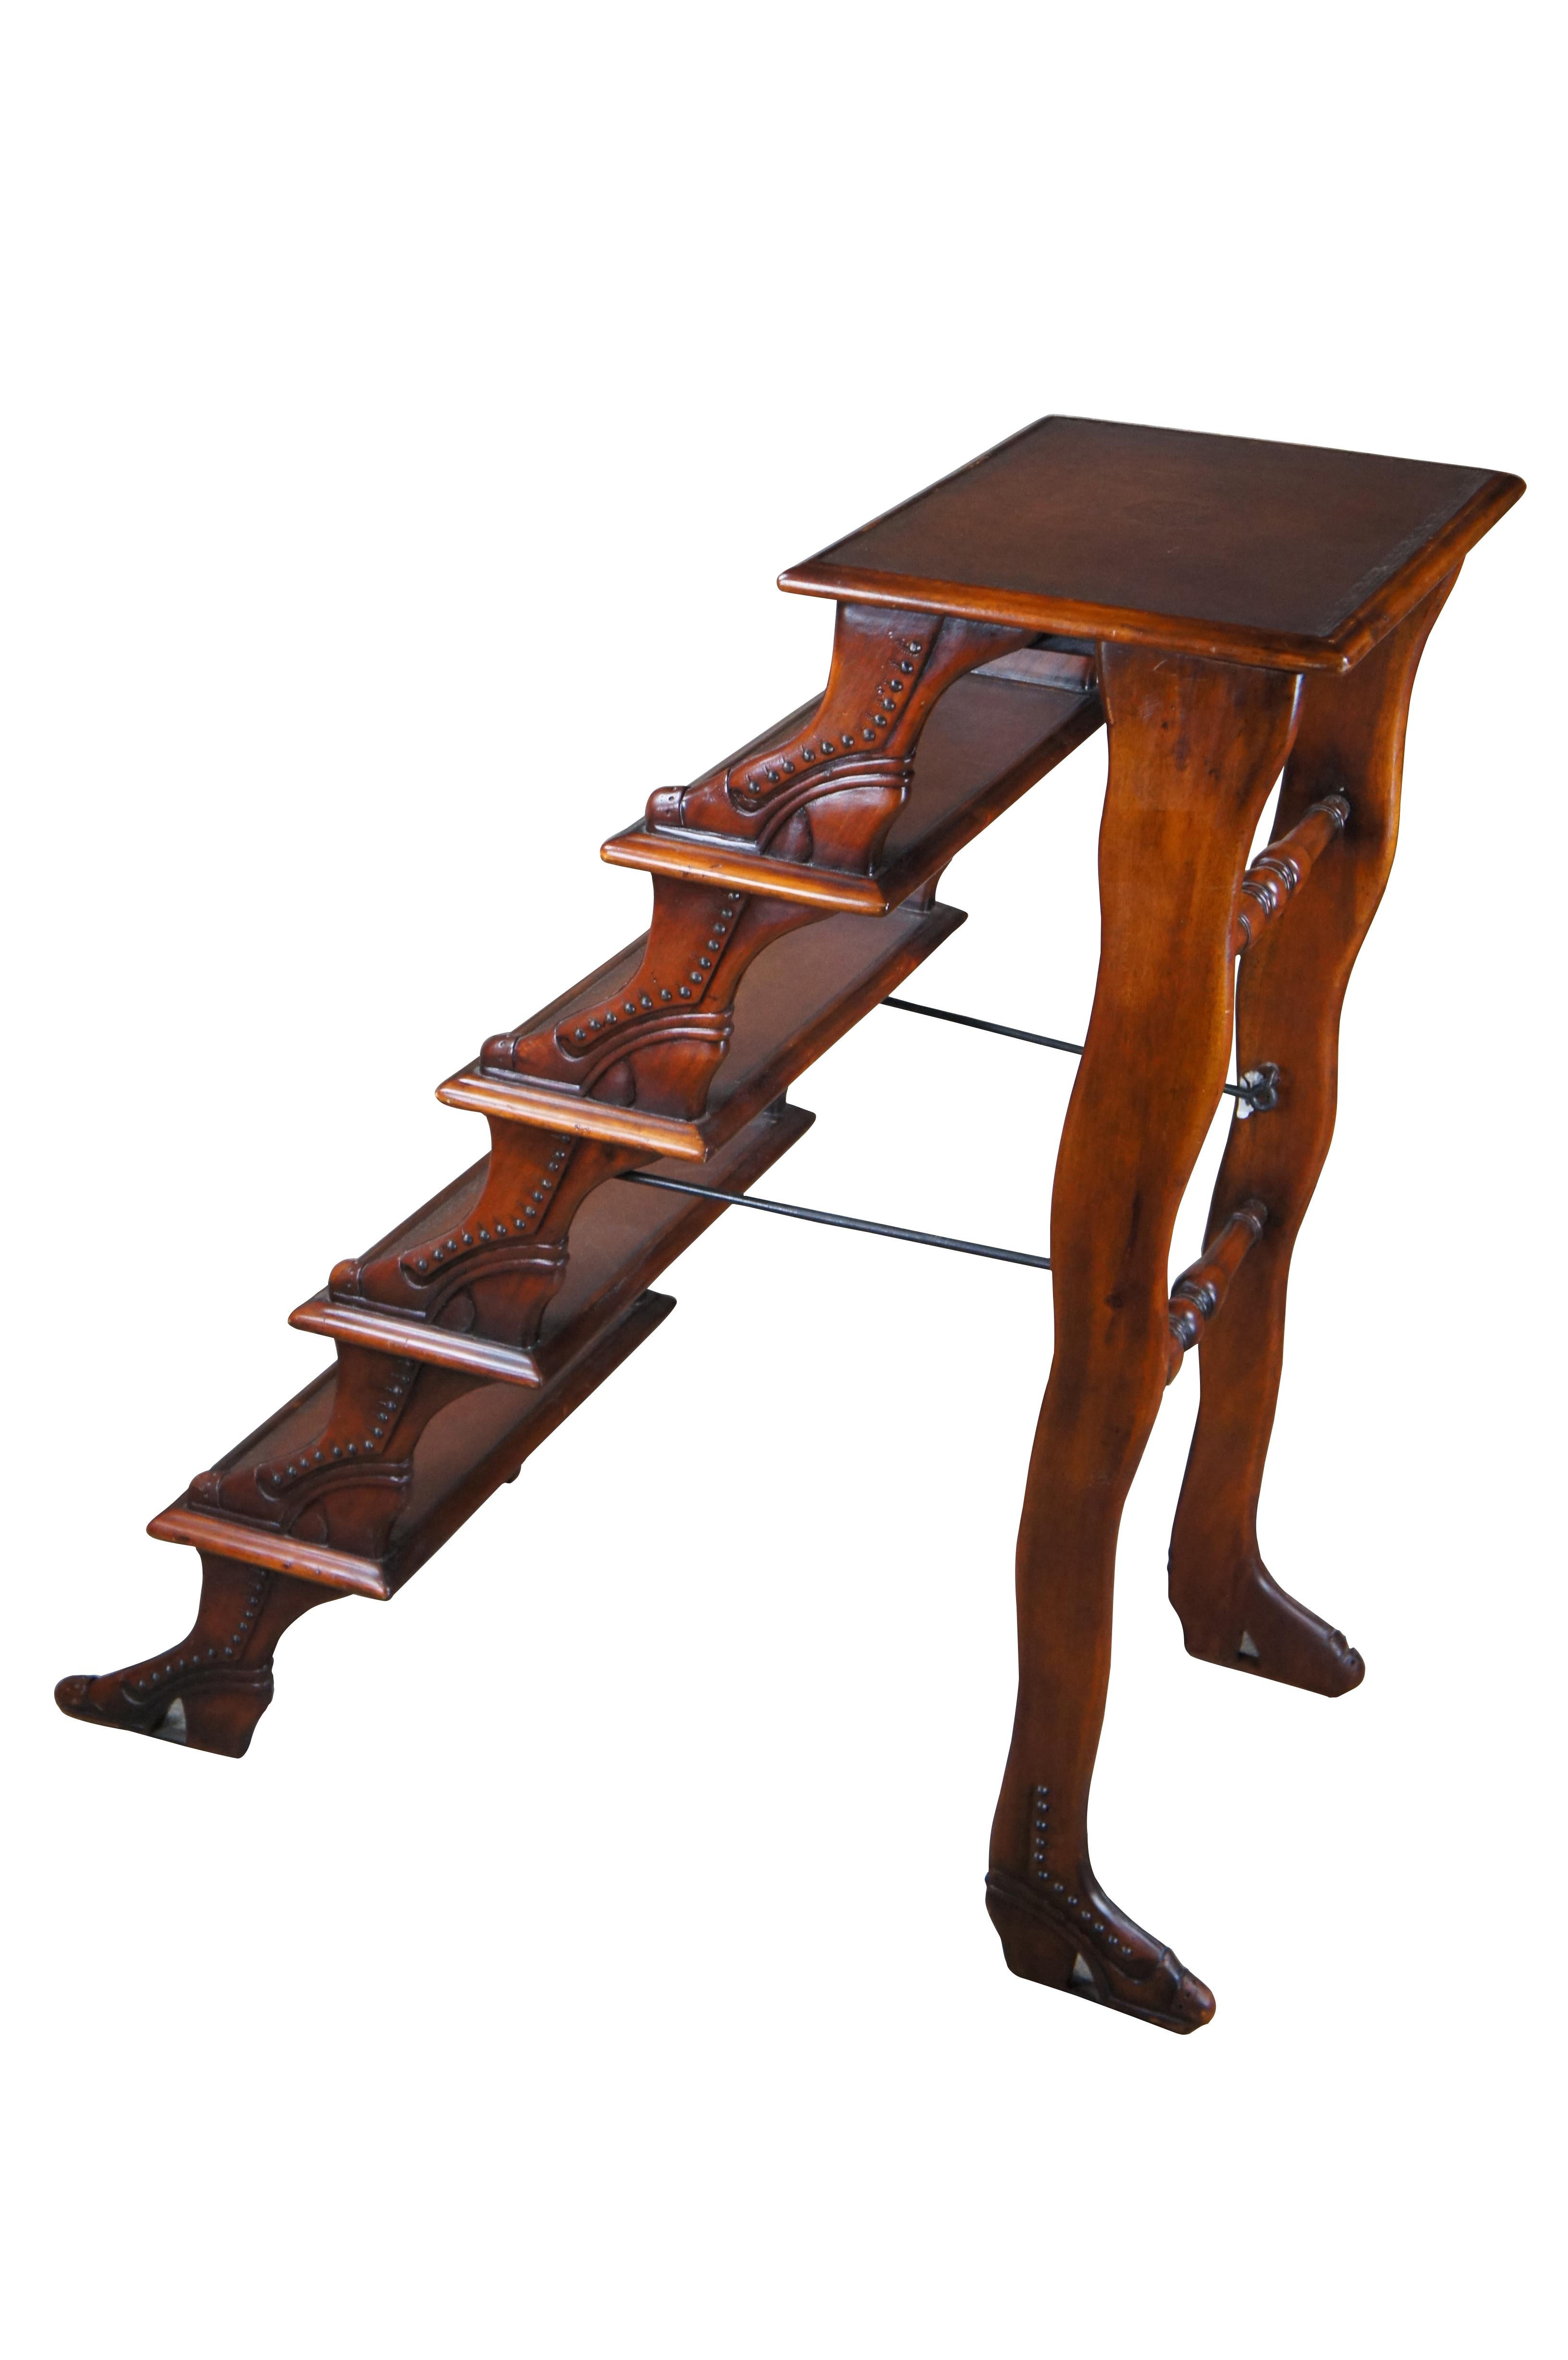 Aesthetically pleasing set of library steps / staircase by Theodore Alexander, Circa late 20th century. Designed from mahogany with a shoe or boot form and brown tooled leather steps. Features 5 steps and a foldable frame for stowing away. When open